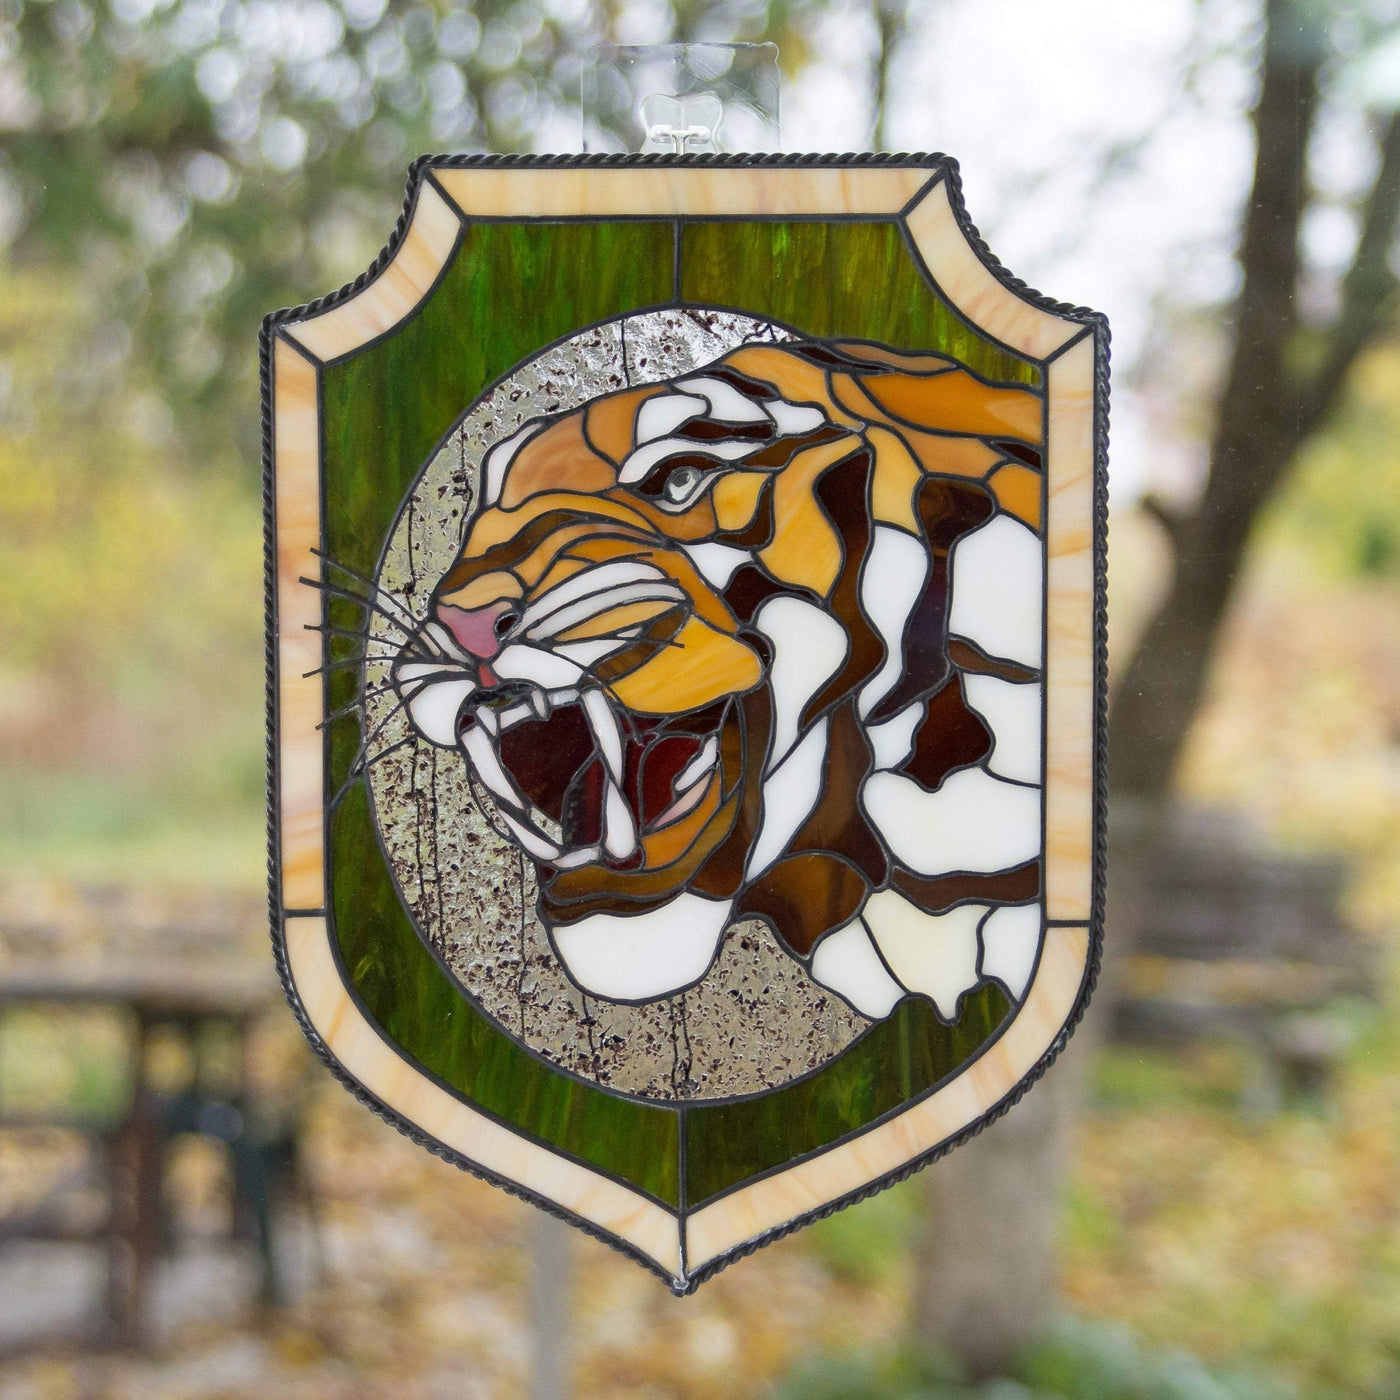 Stained glass panel depicting tiger's head with fangs in an oval and green background